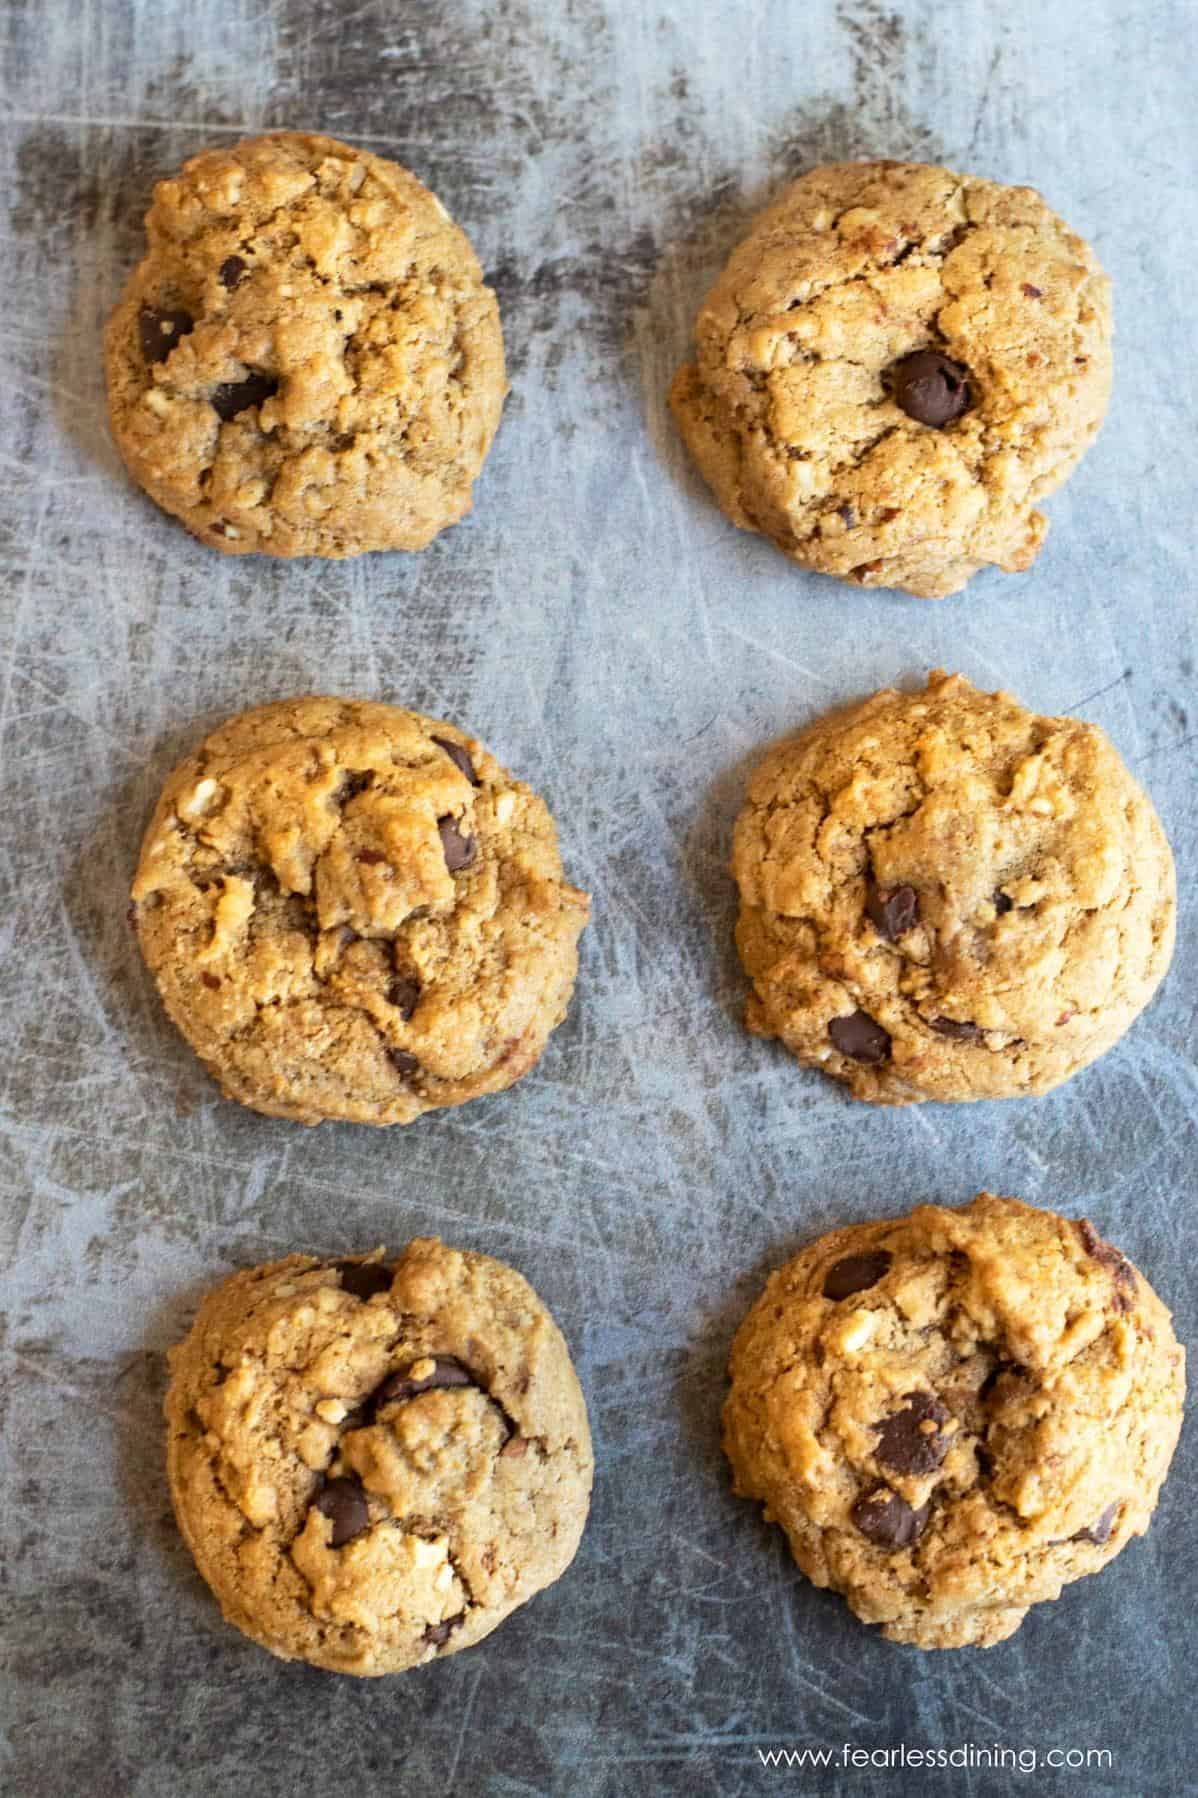  Indulge your sweet tooth with these gooey Hazelnut Rum Chocolate Chip Cookies.